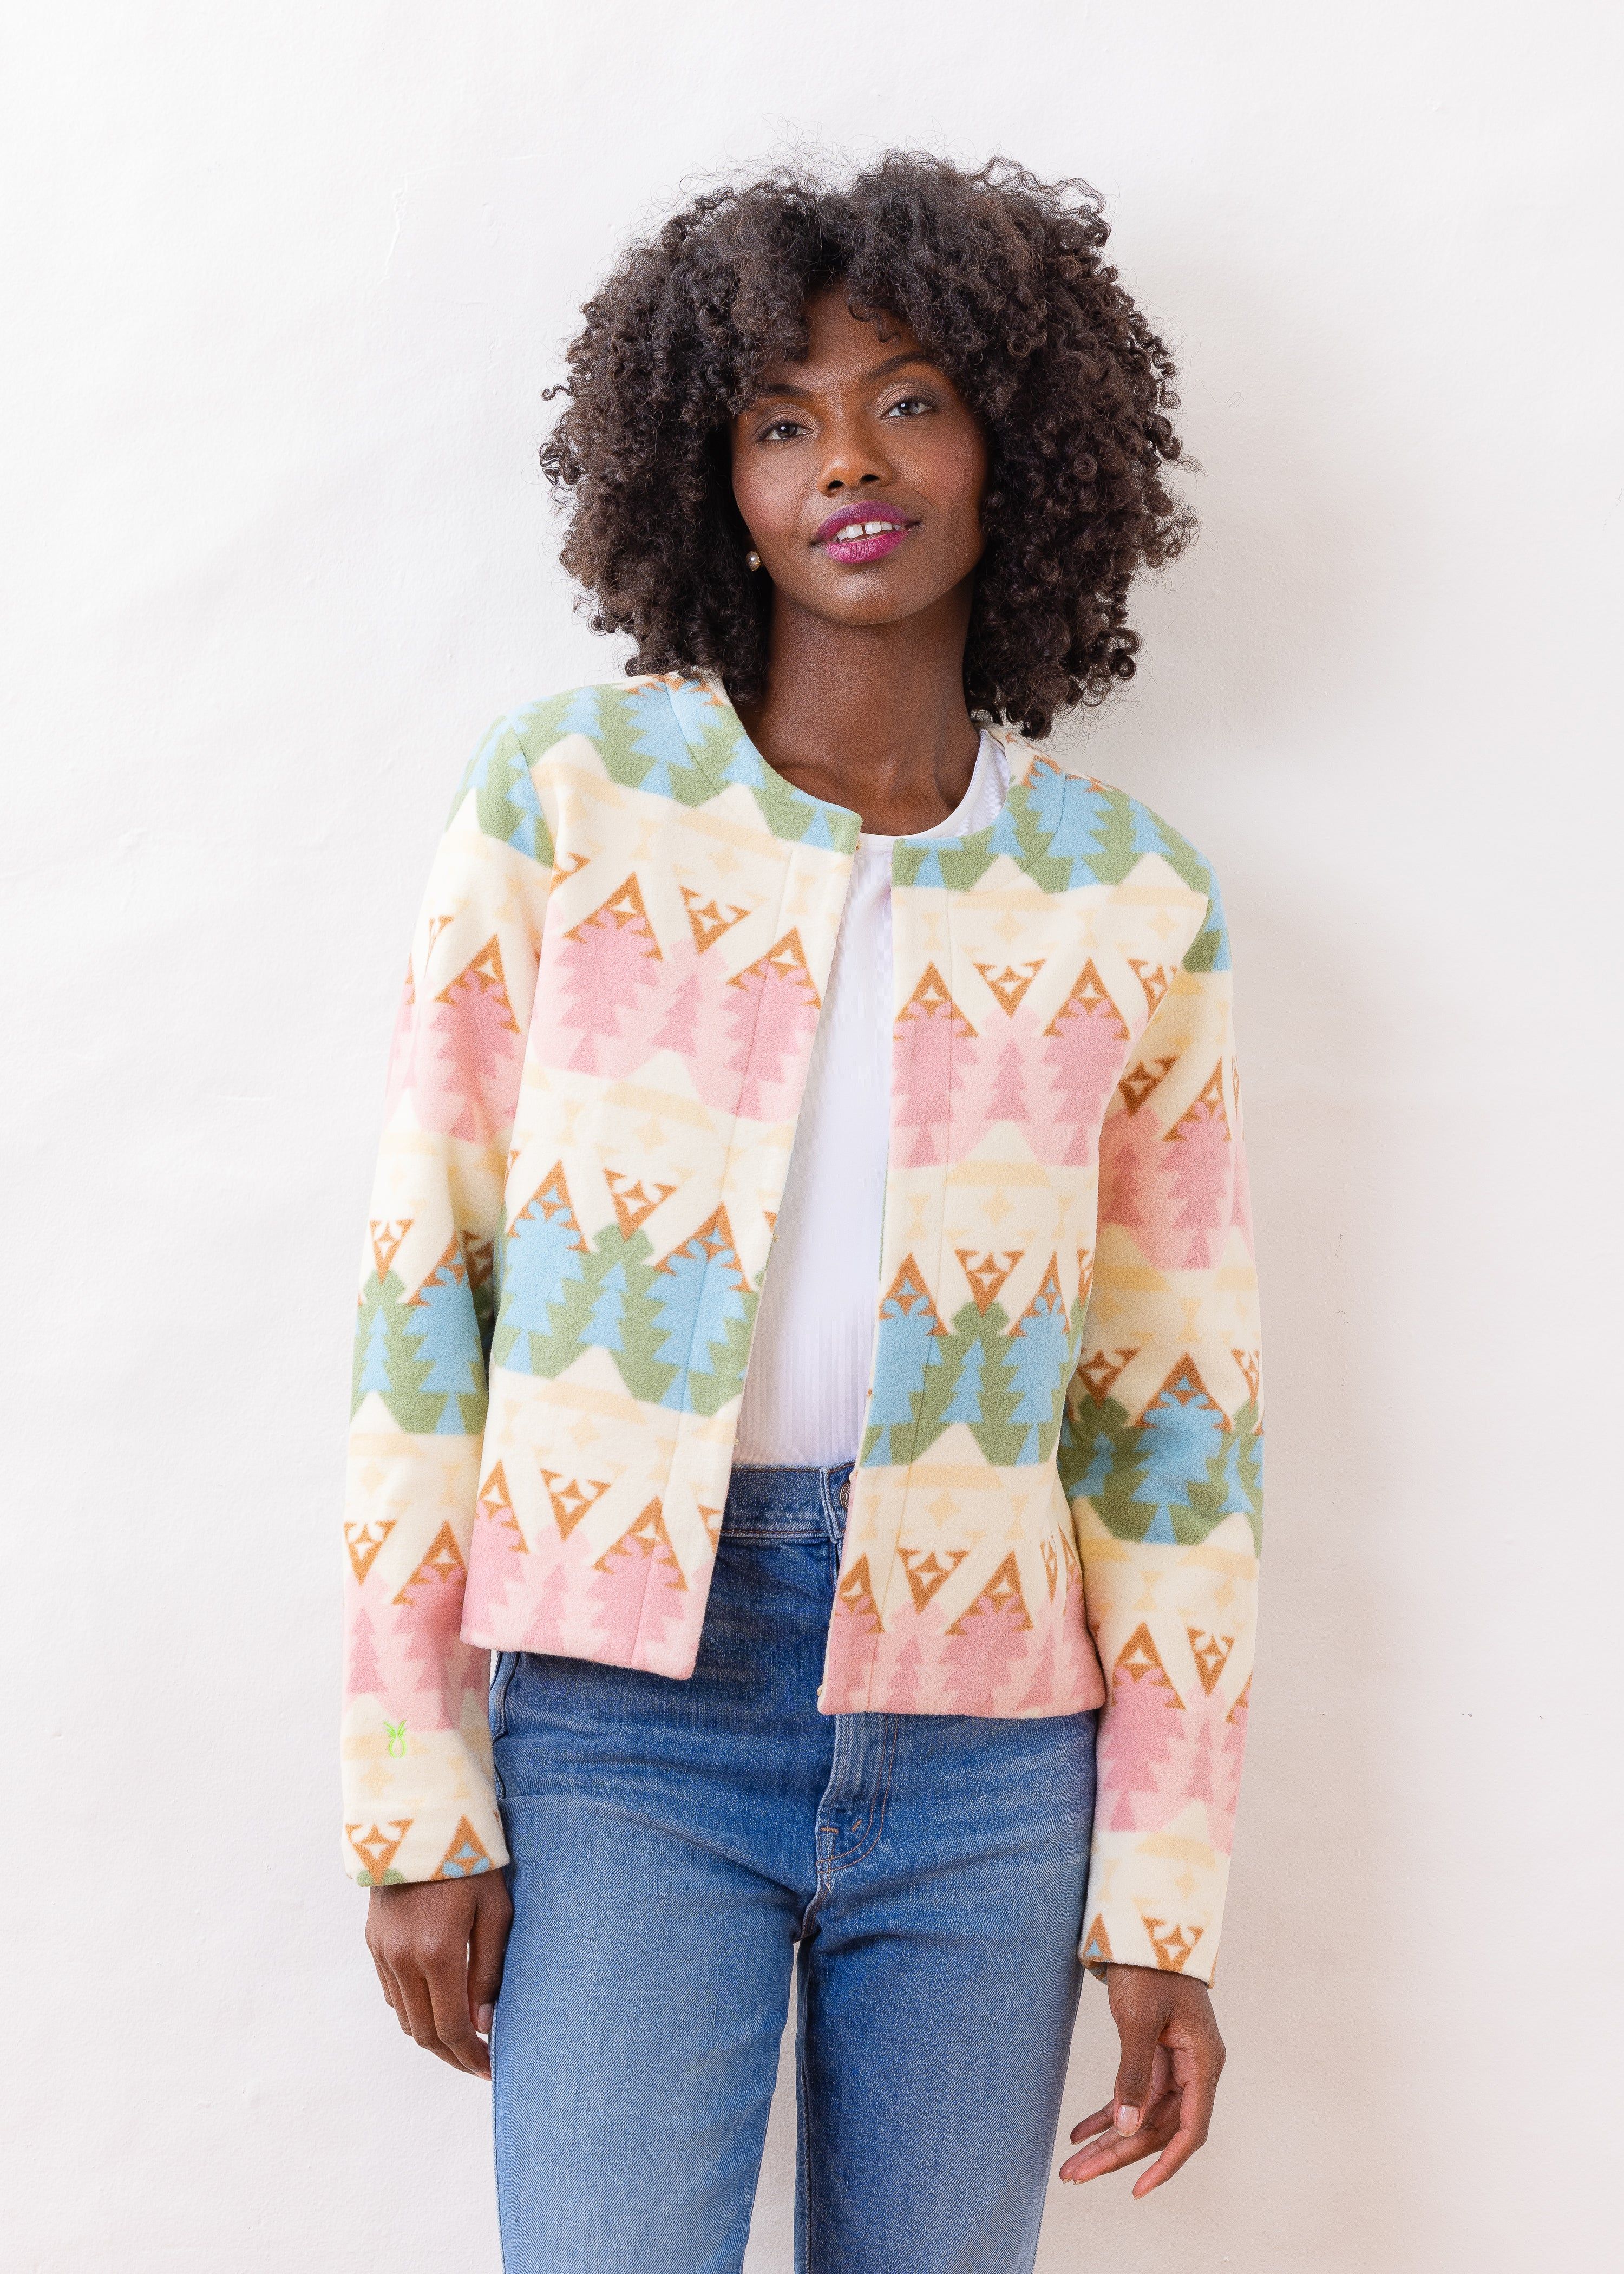 Cat Rock Cardigan in Vello (Canyon Road) | Dudley Stephens